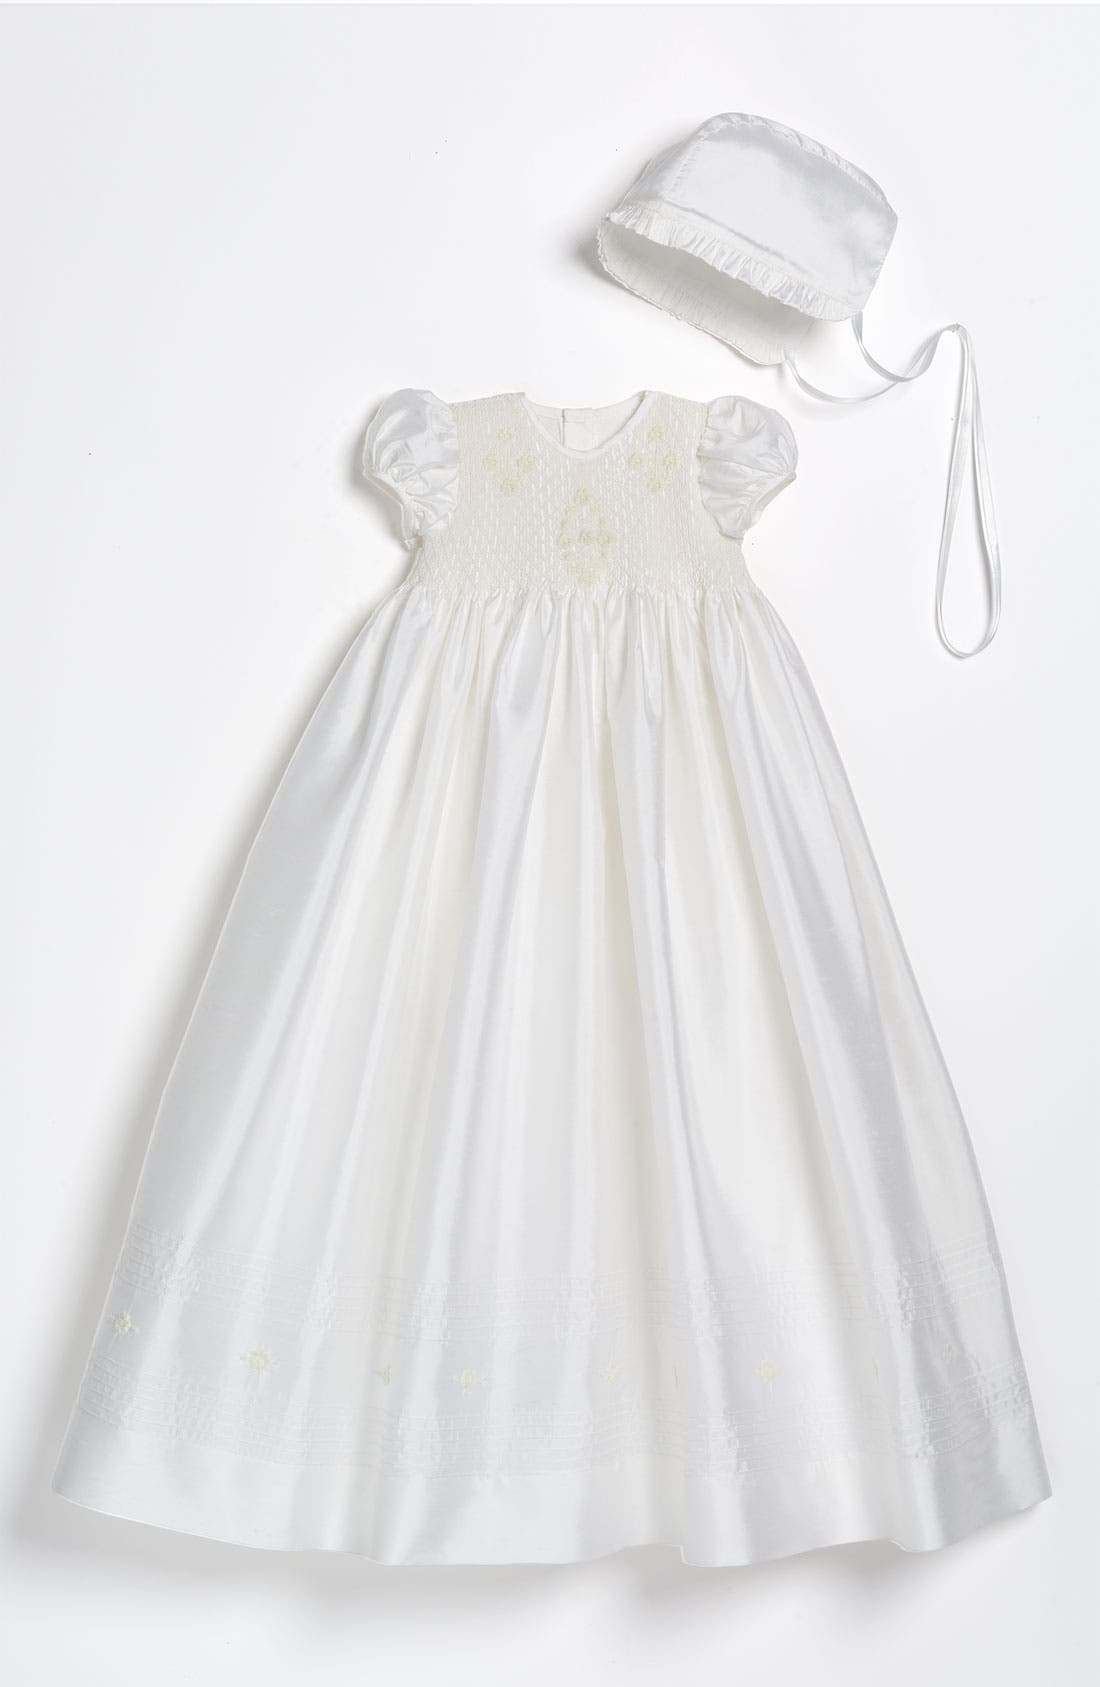 christening gowns baby girl